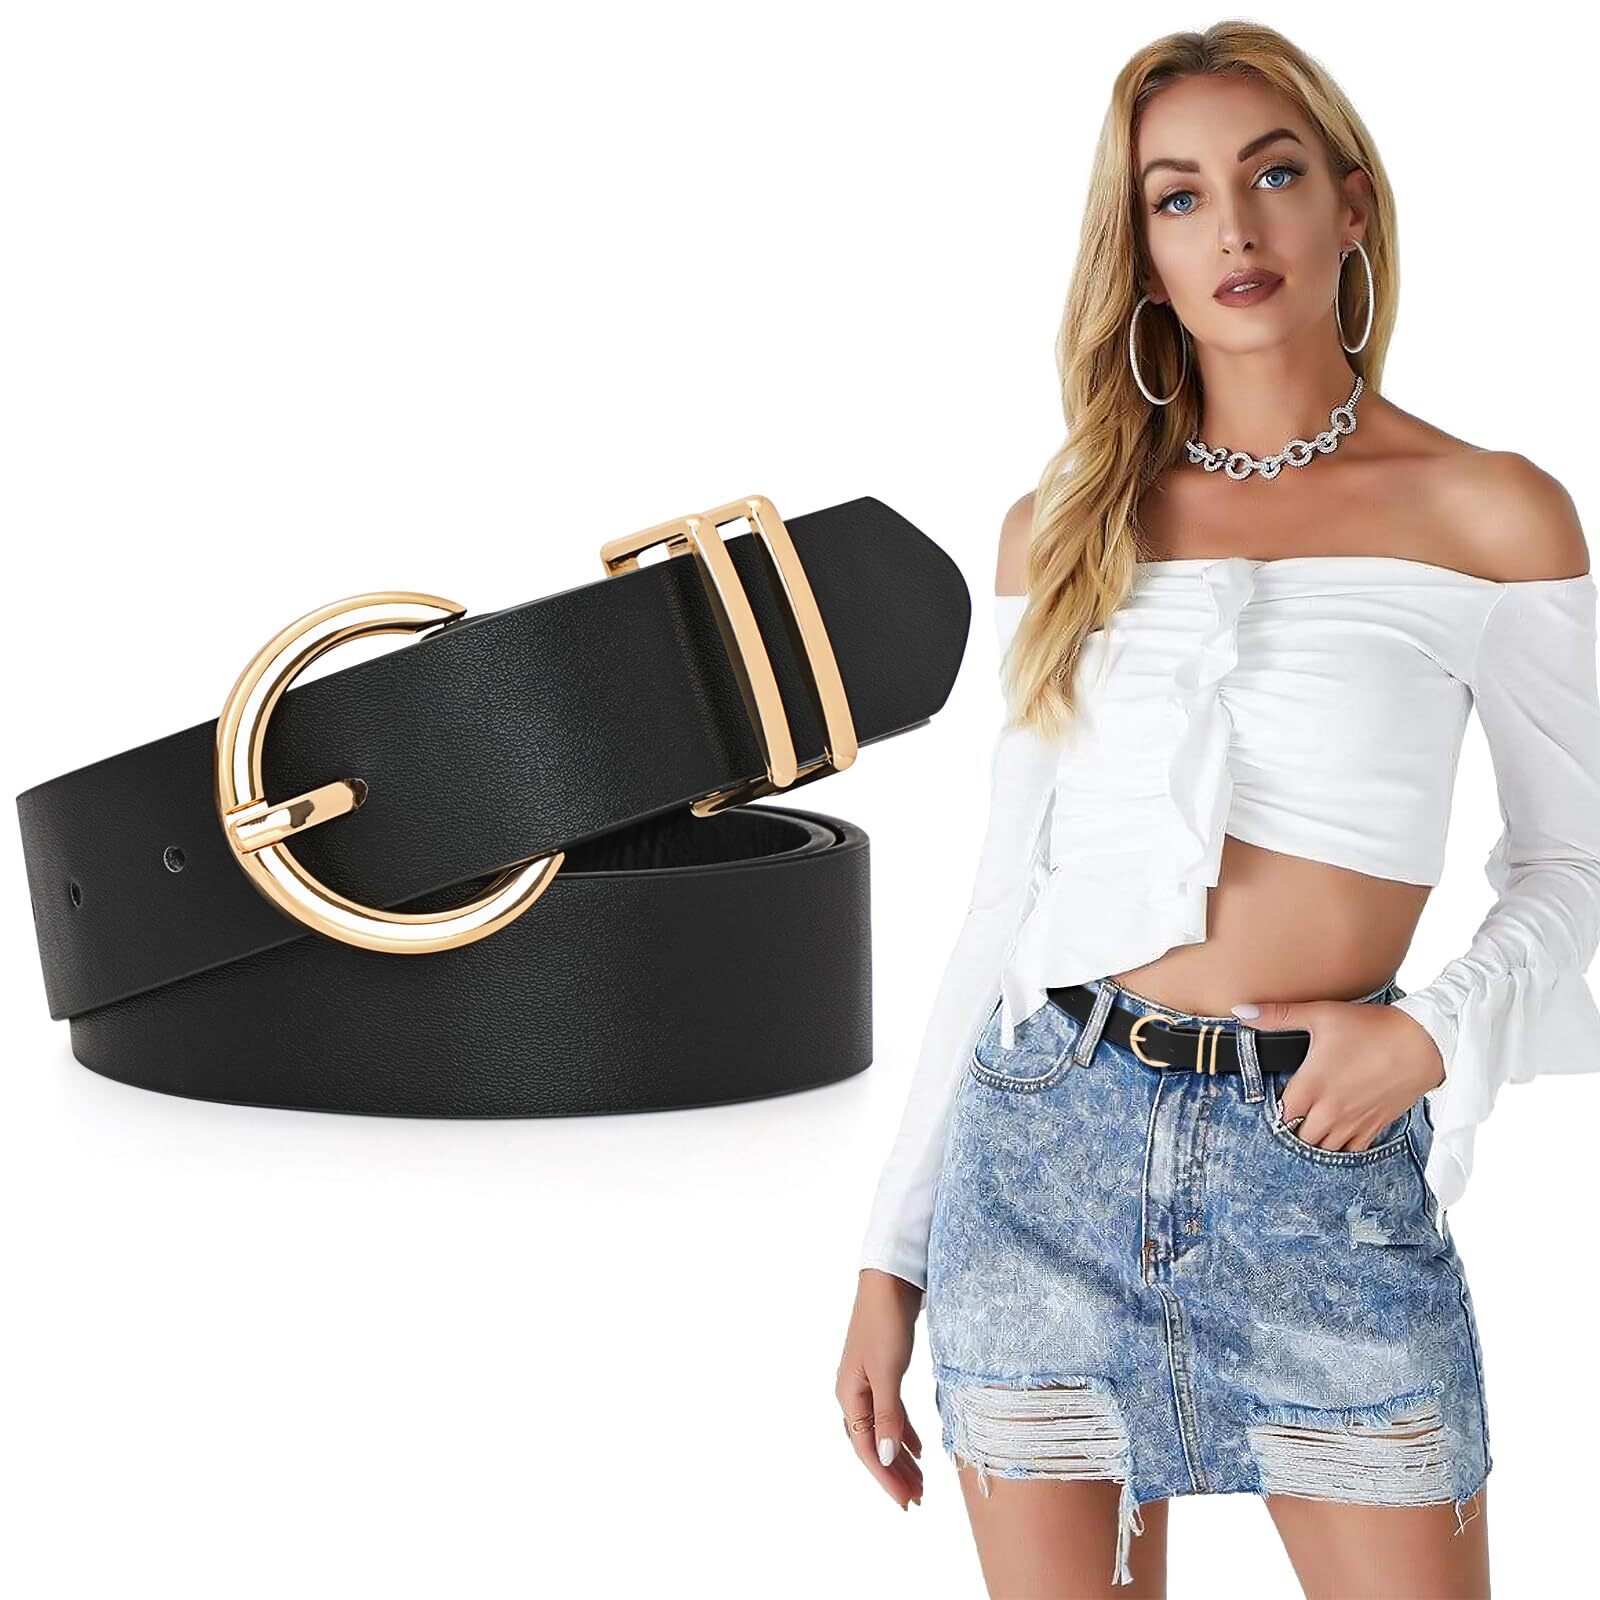 WHIPPY Women's Leather Belt Gold Buckle Plus Size Waist Belts for Jeans ...